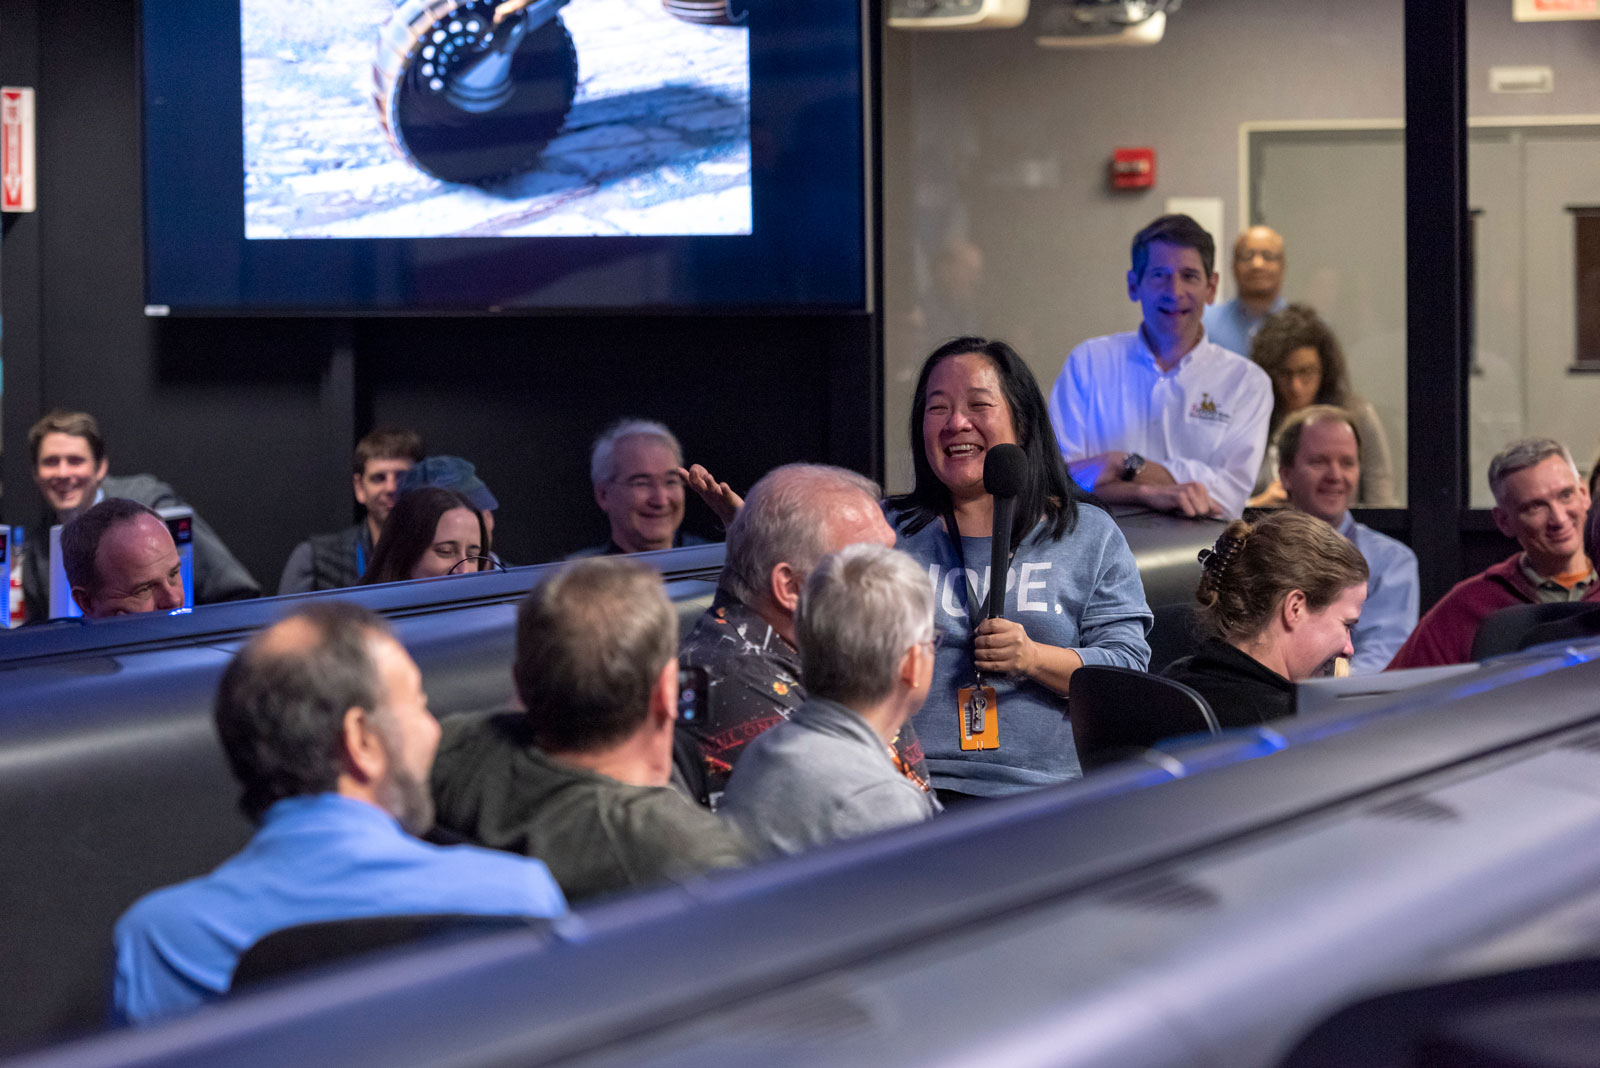 Cindy Oda stood up to share her experience working with NASA’s Opportunity rover during a team meeting in Mission Control at NASA’s Jet Propulsion Laboratory in Pasadena, California.